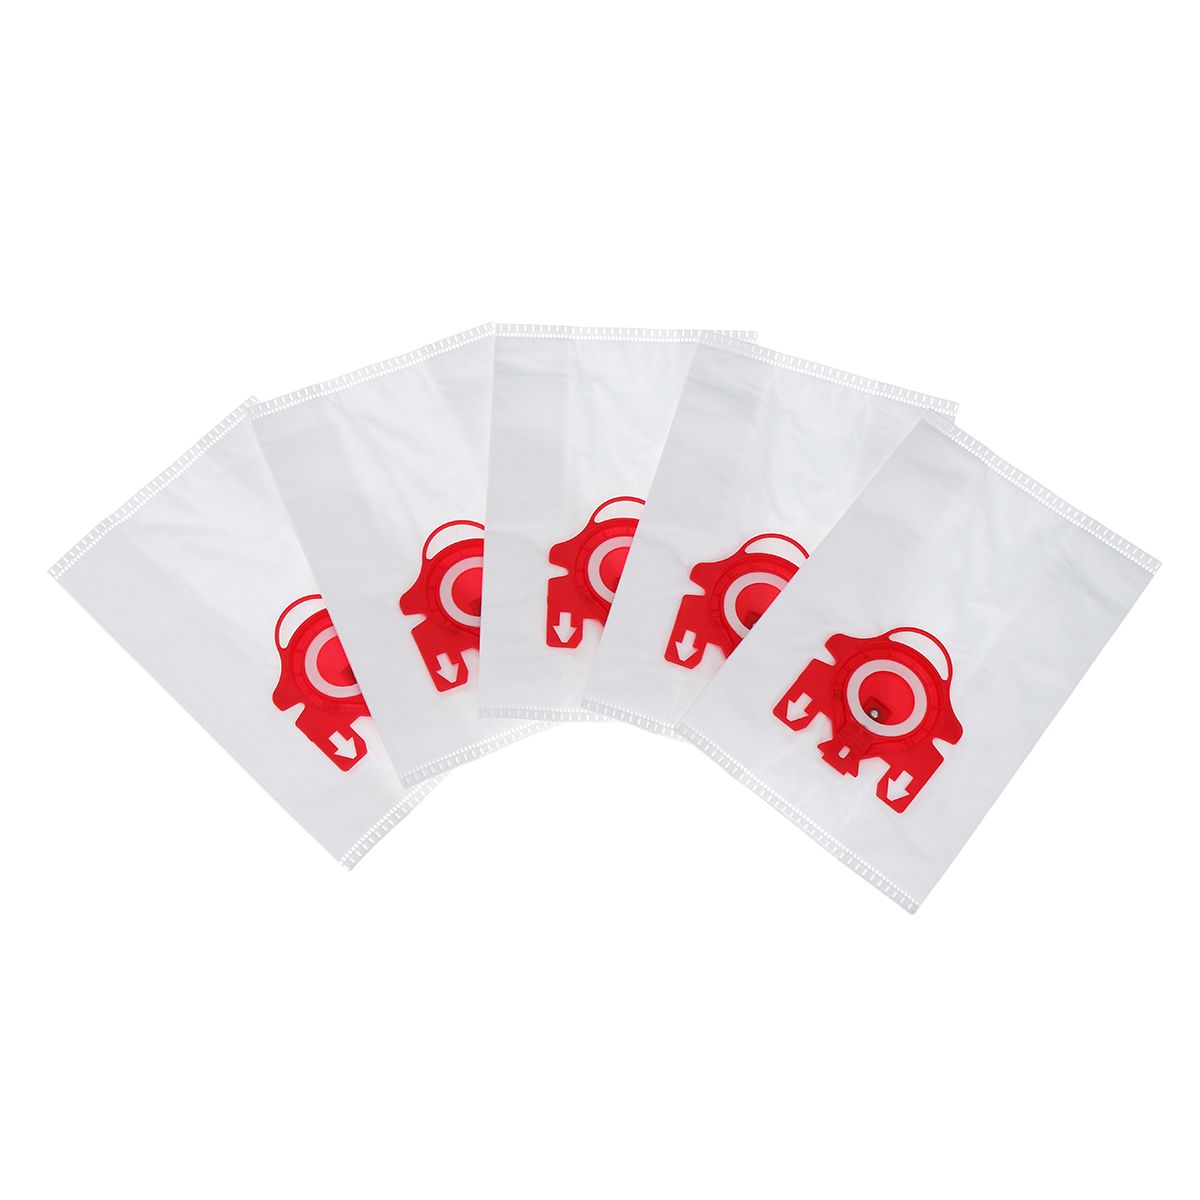 5PCS-Miele-Dust-Bags-for-Miele-FJM-Synthetic-C1-C2-Type-Vacuum-Cleaner-1602913